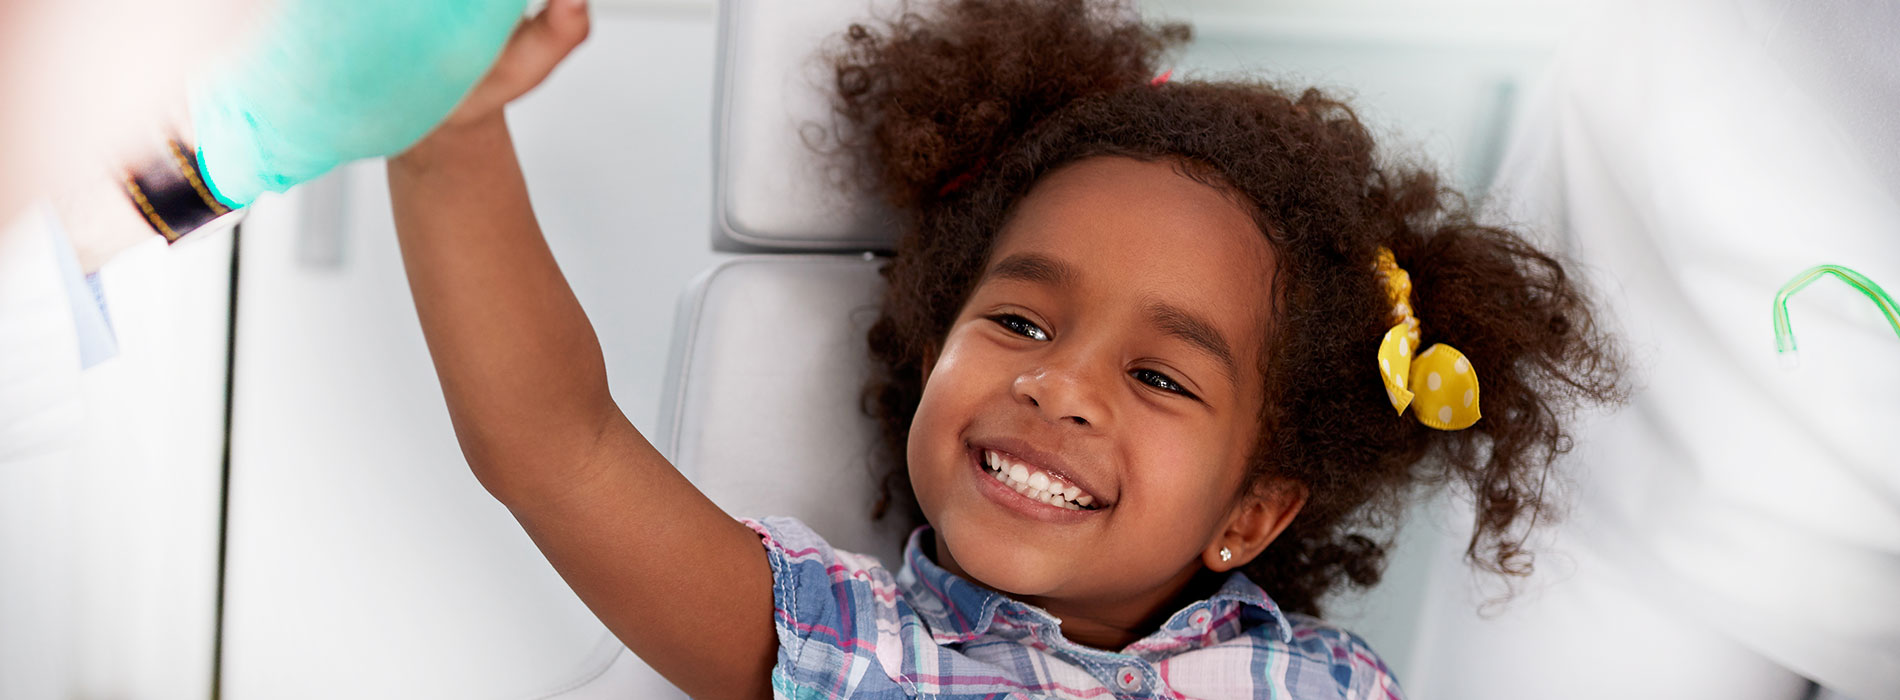 Pediatric Dental Services in Indian Land SC